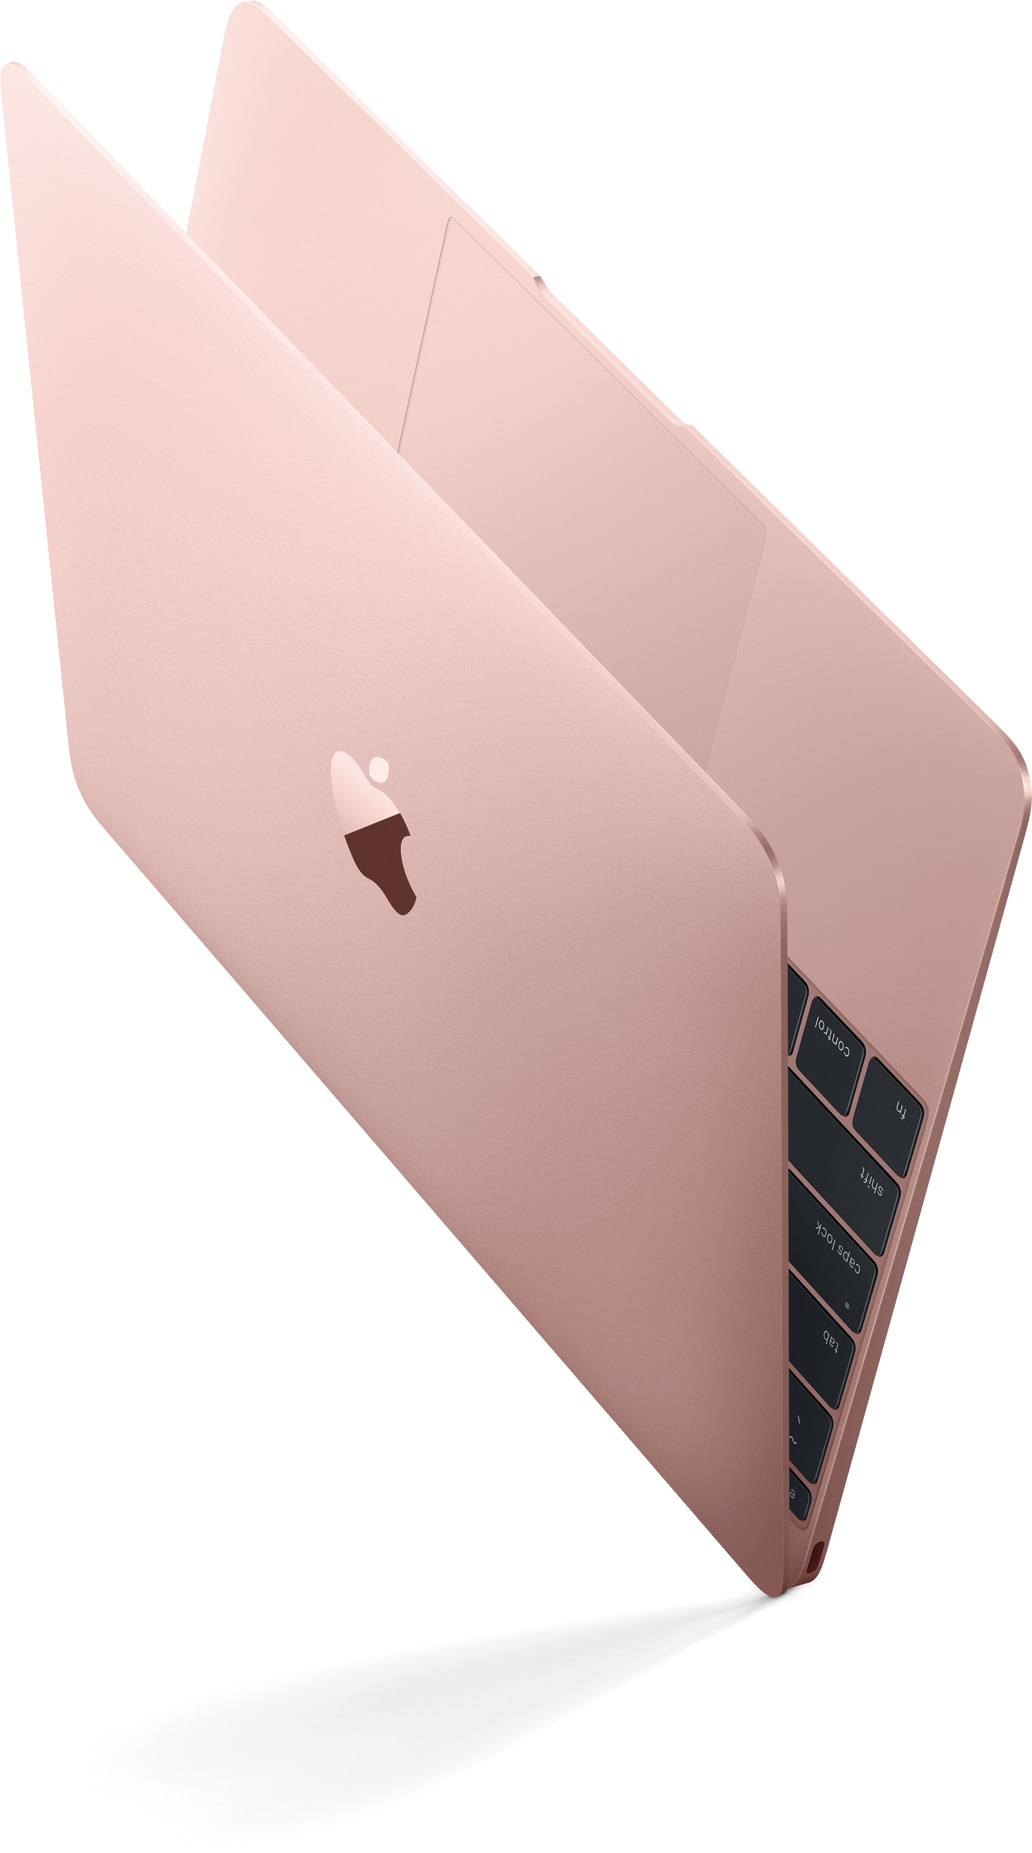 Pink gold MacBook tilted diagonally and sideways